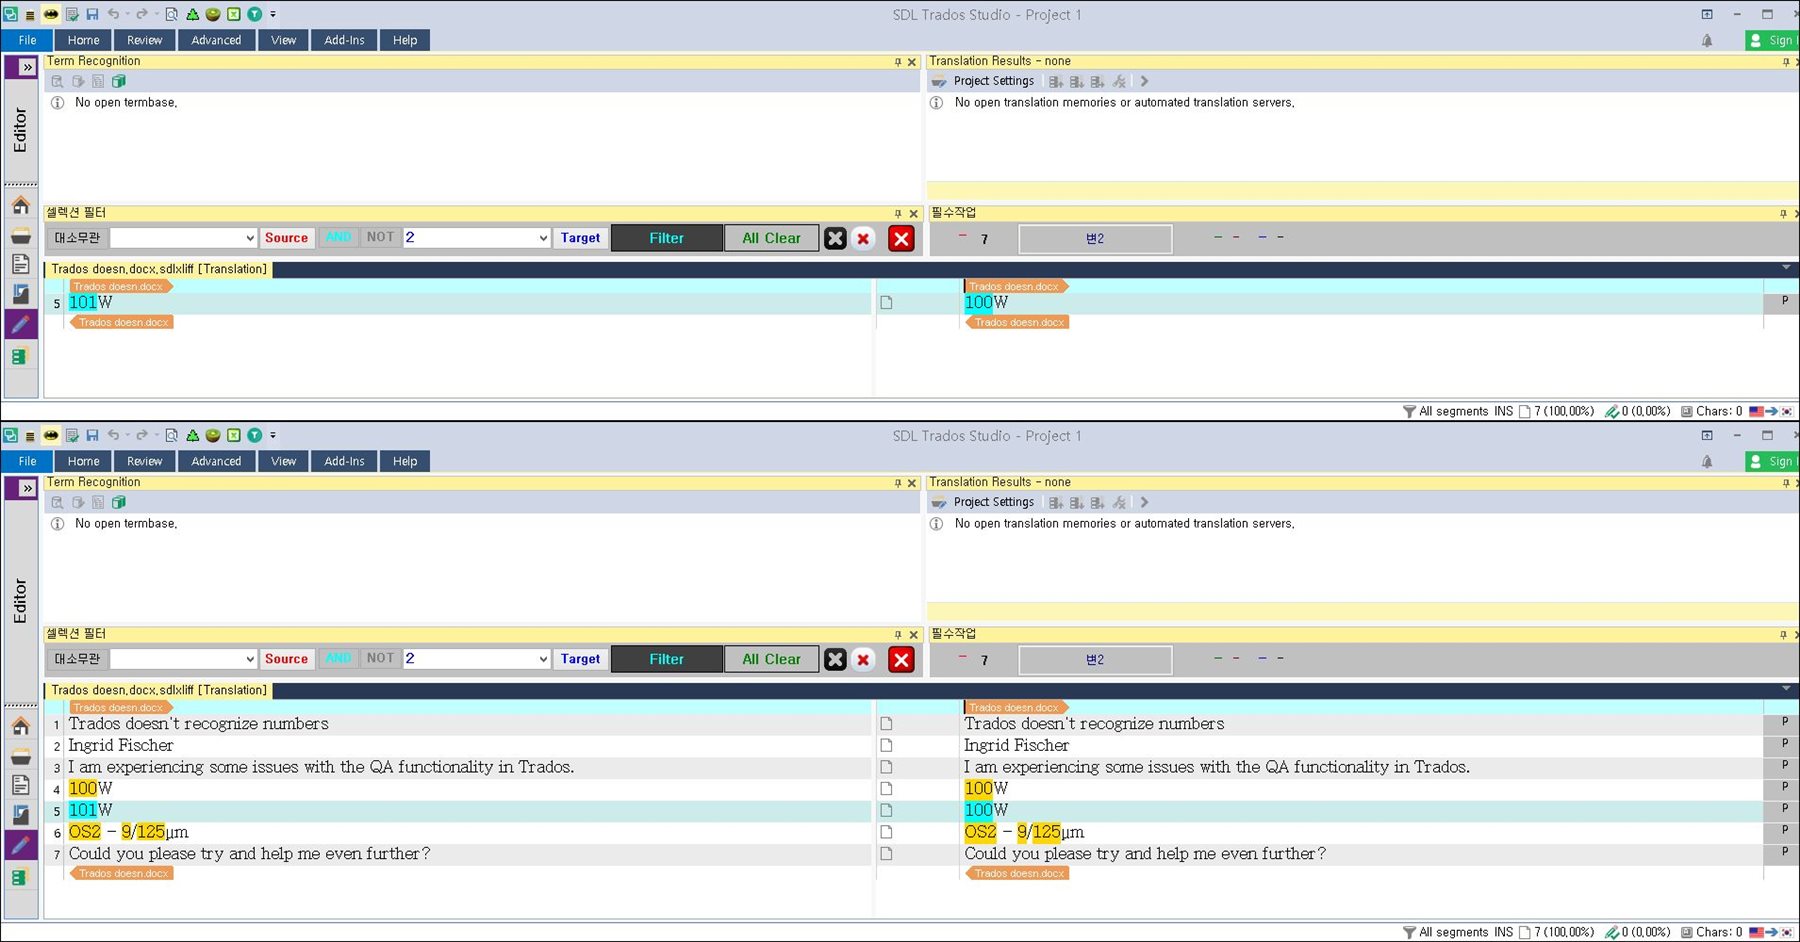 Screenshot of Trados Studio with custom Verifier results, segment number 5 highlighted in orange indicating an issue, and segment number 6 in cyan indicating no issue.